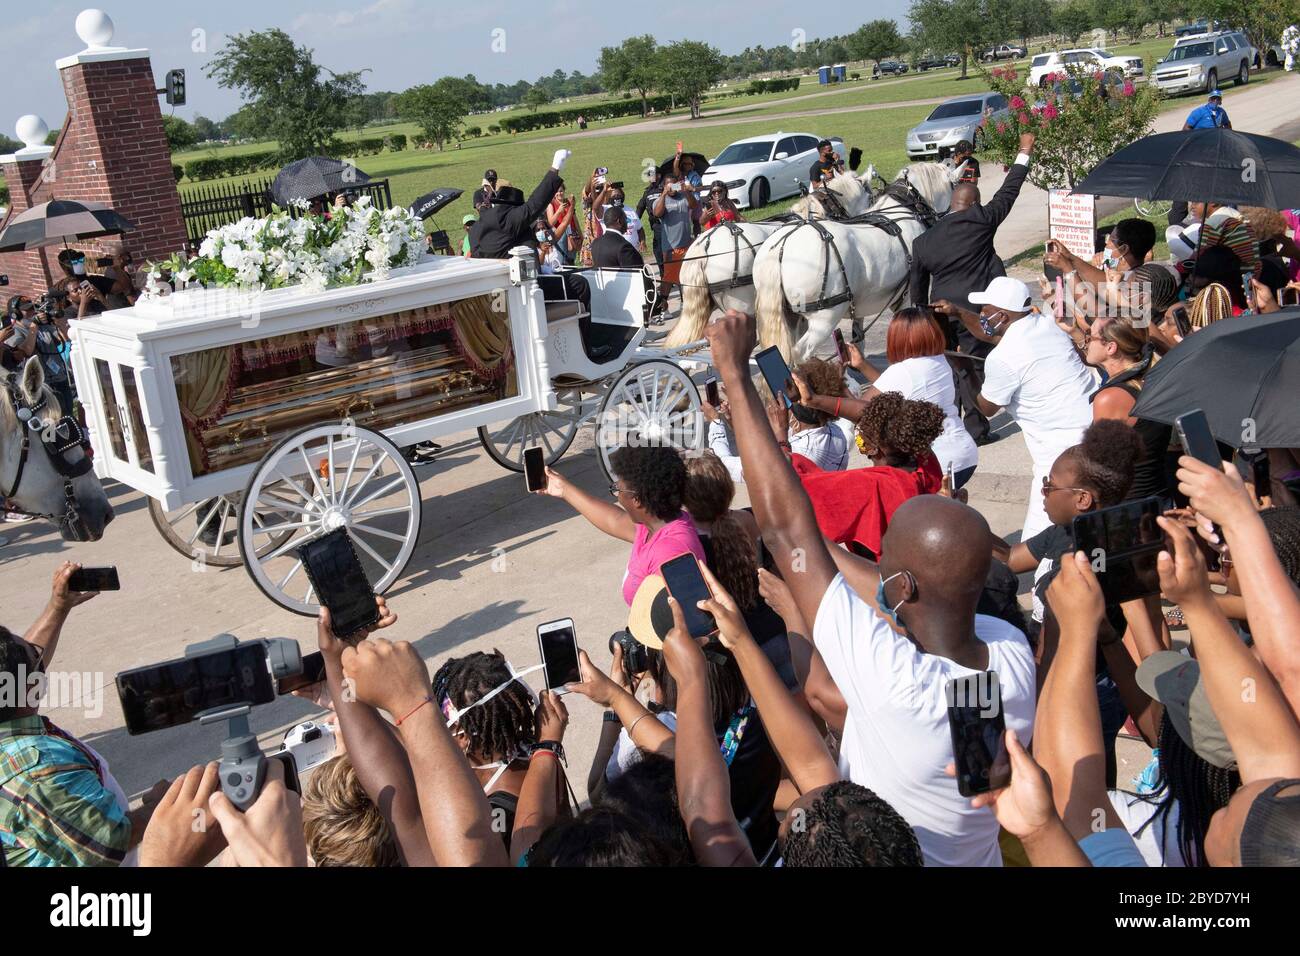 A horse-drawn carriage containing the body of George Floyd approaches Houston Memorial Gardens cemetery, in suburban Houston, where he will be buried next to his mother. The death of Floyd, who was killed by a white policeman in late May, set off protests worldwide against racism and police brutality. Stock Photo